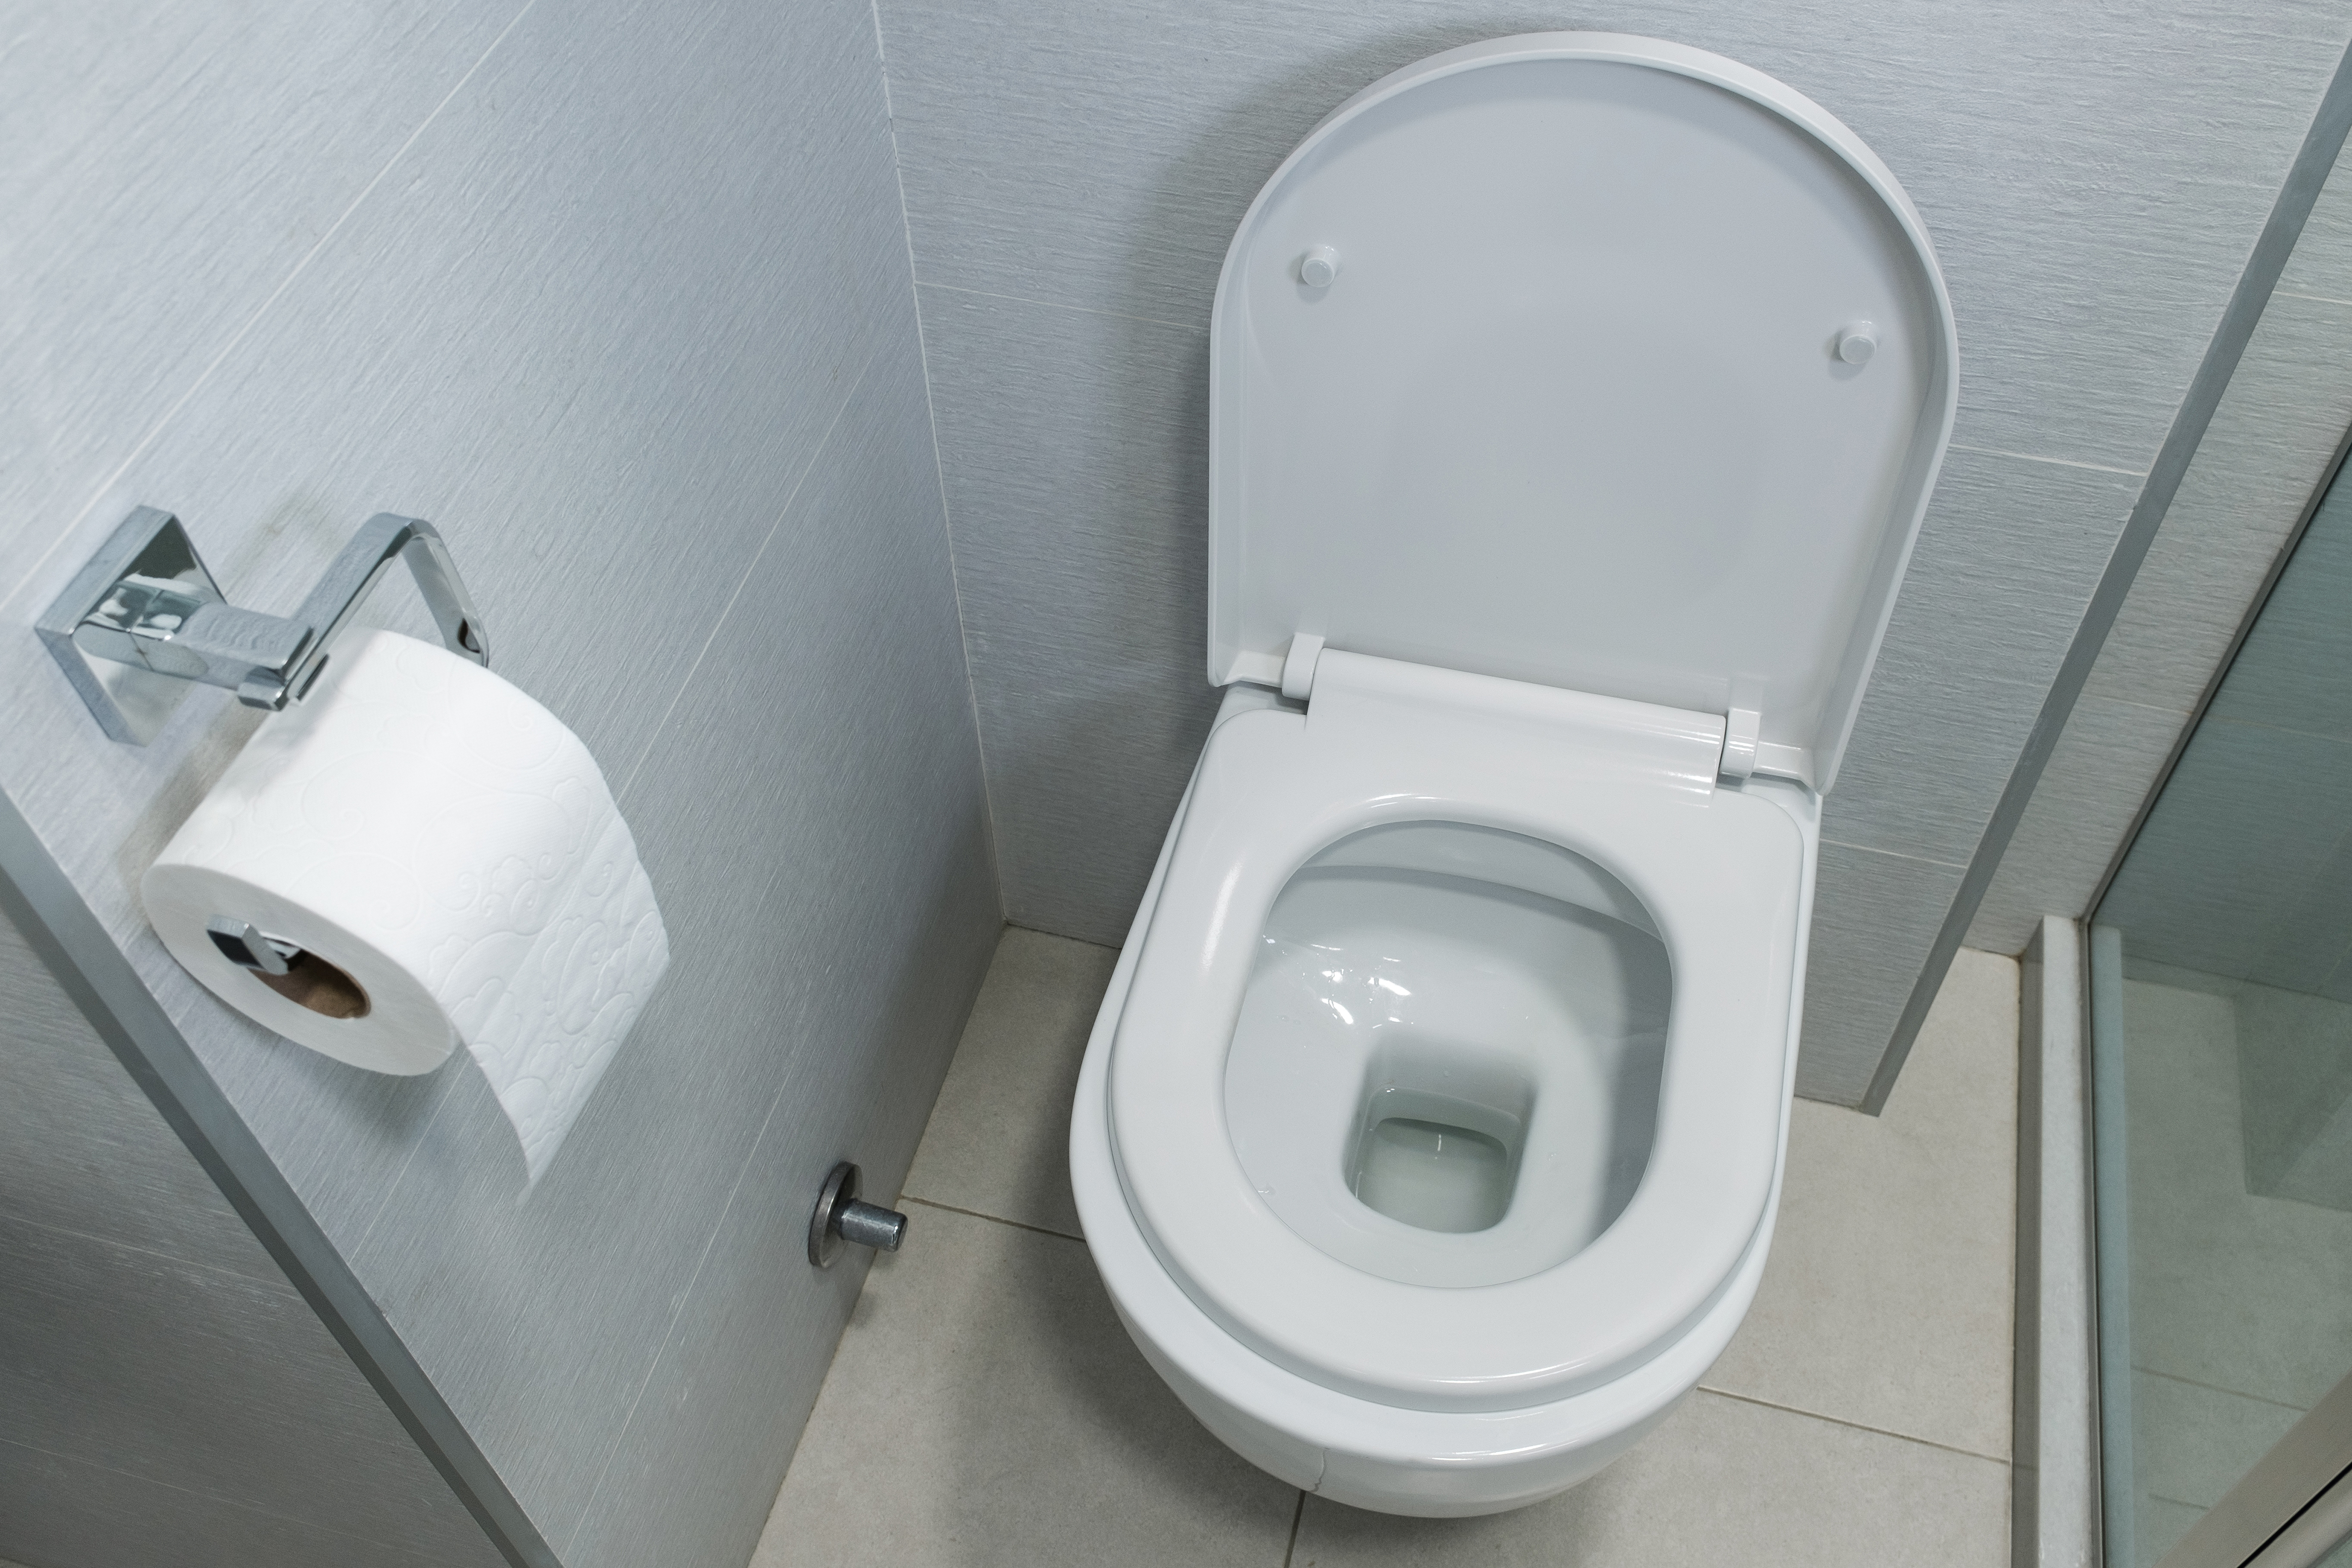 A toilet | Source: Getty Images